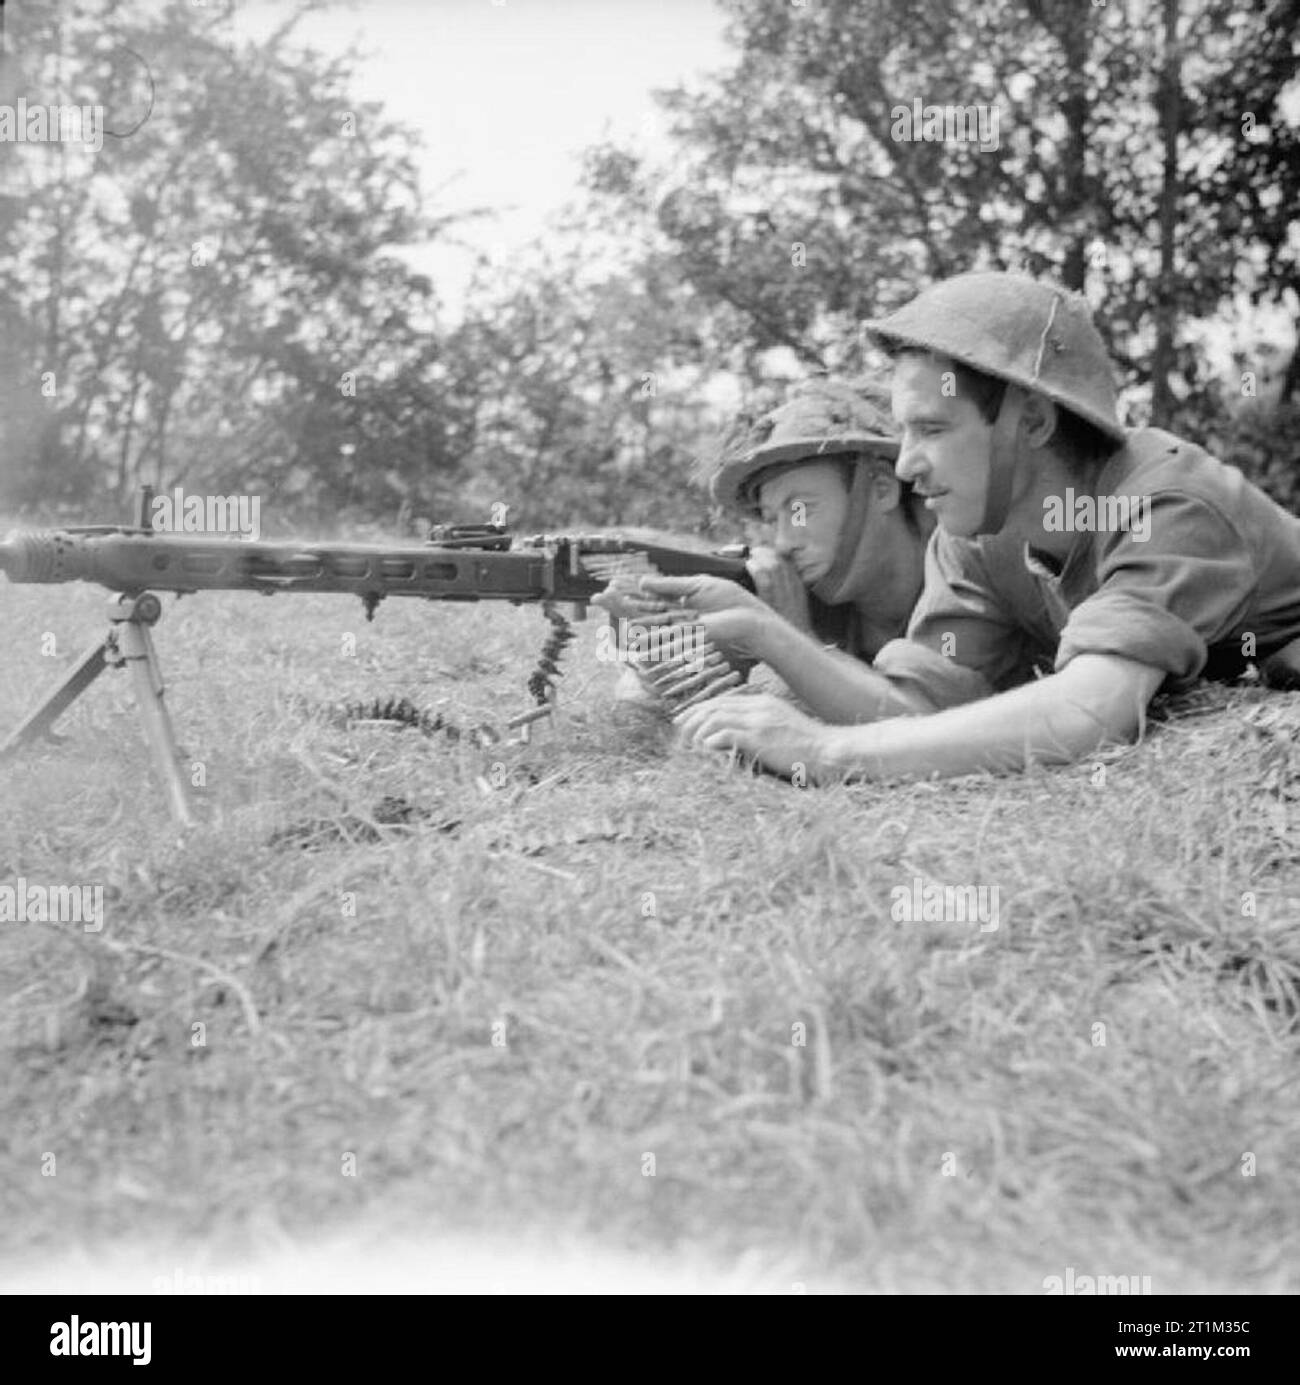 The British Army in Normandy 1944 British troops fire a captured German MG42 machine gun during training at 59th Division's Battle School at Vienne En Bessin, 1 August 1944. Stock Photo